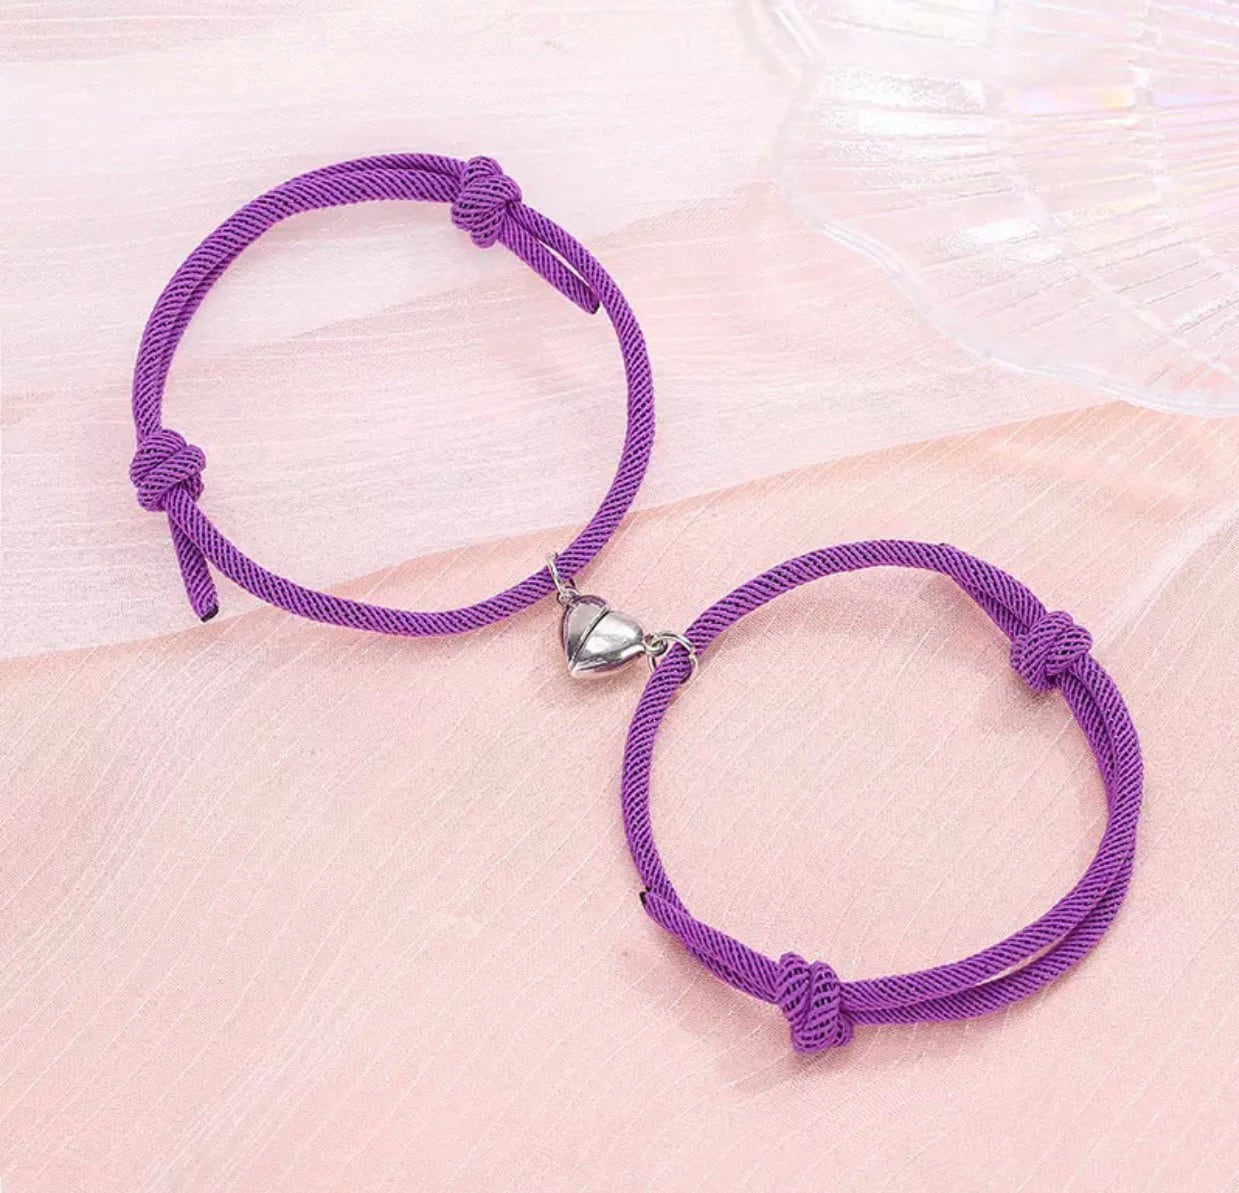 Valentines Day Magnetic Heart Charm Bracelets Without Charms With Two  Halves And Braid Rope For Couples And Friends From Wujinxiajiu, $10.52